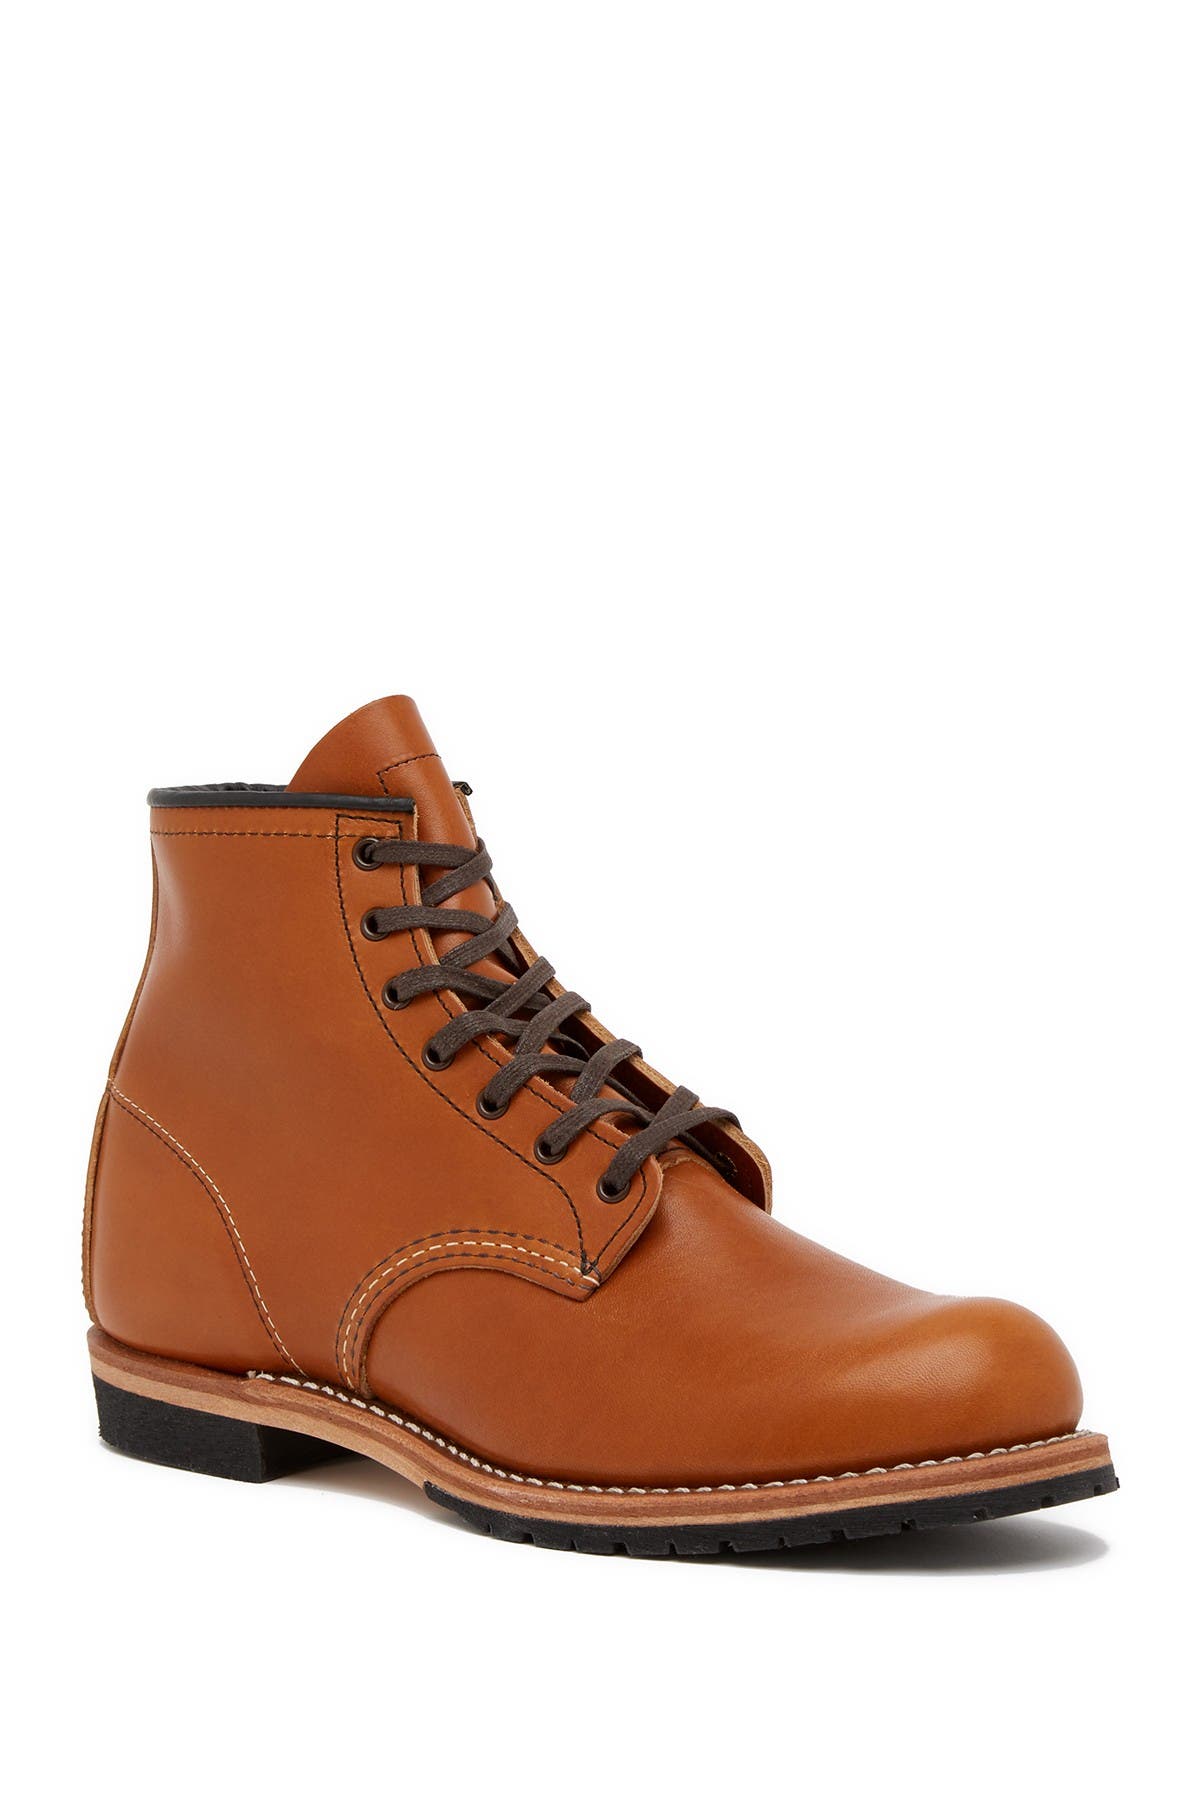 red wing e width